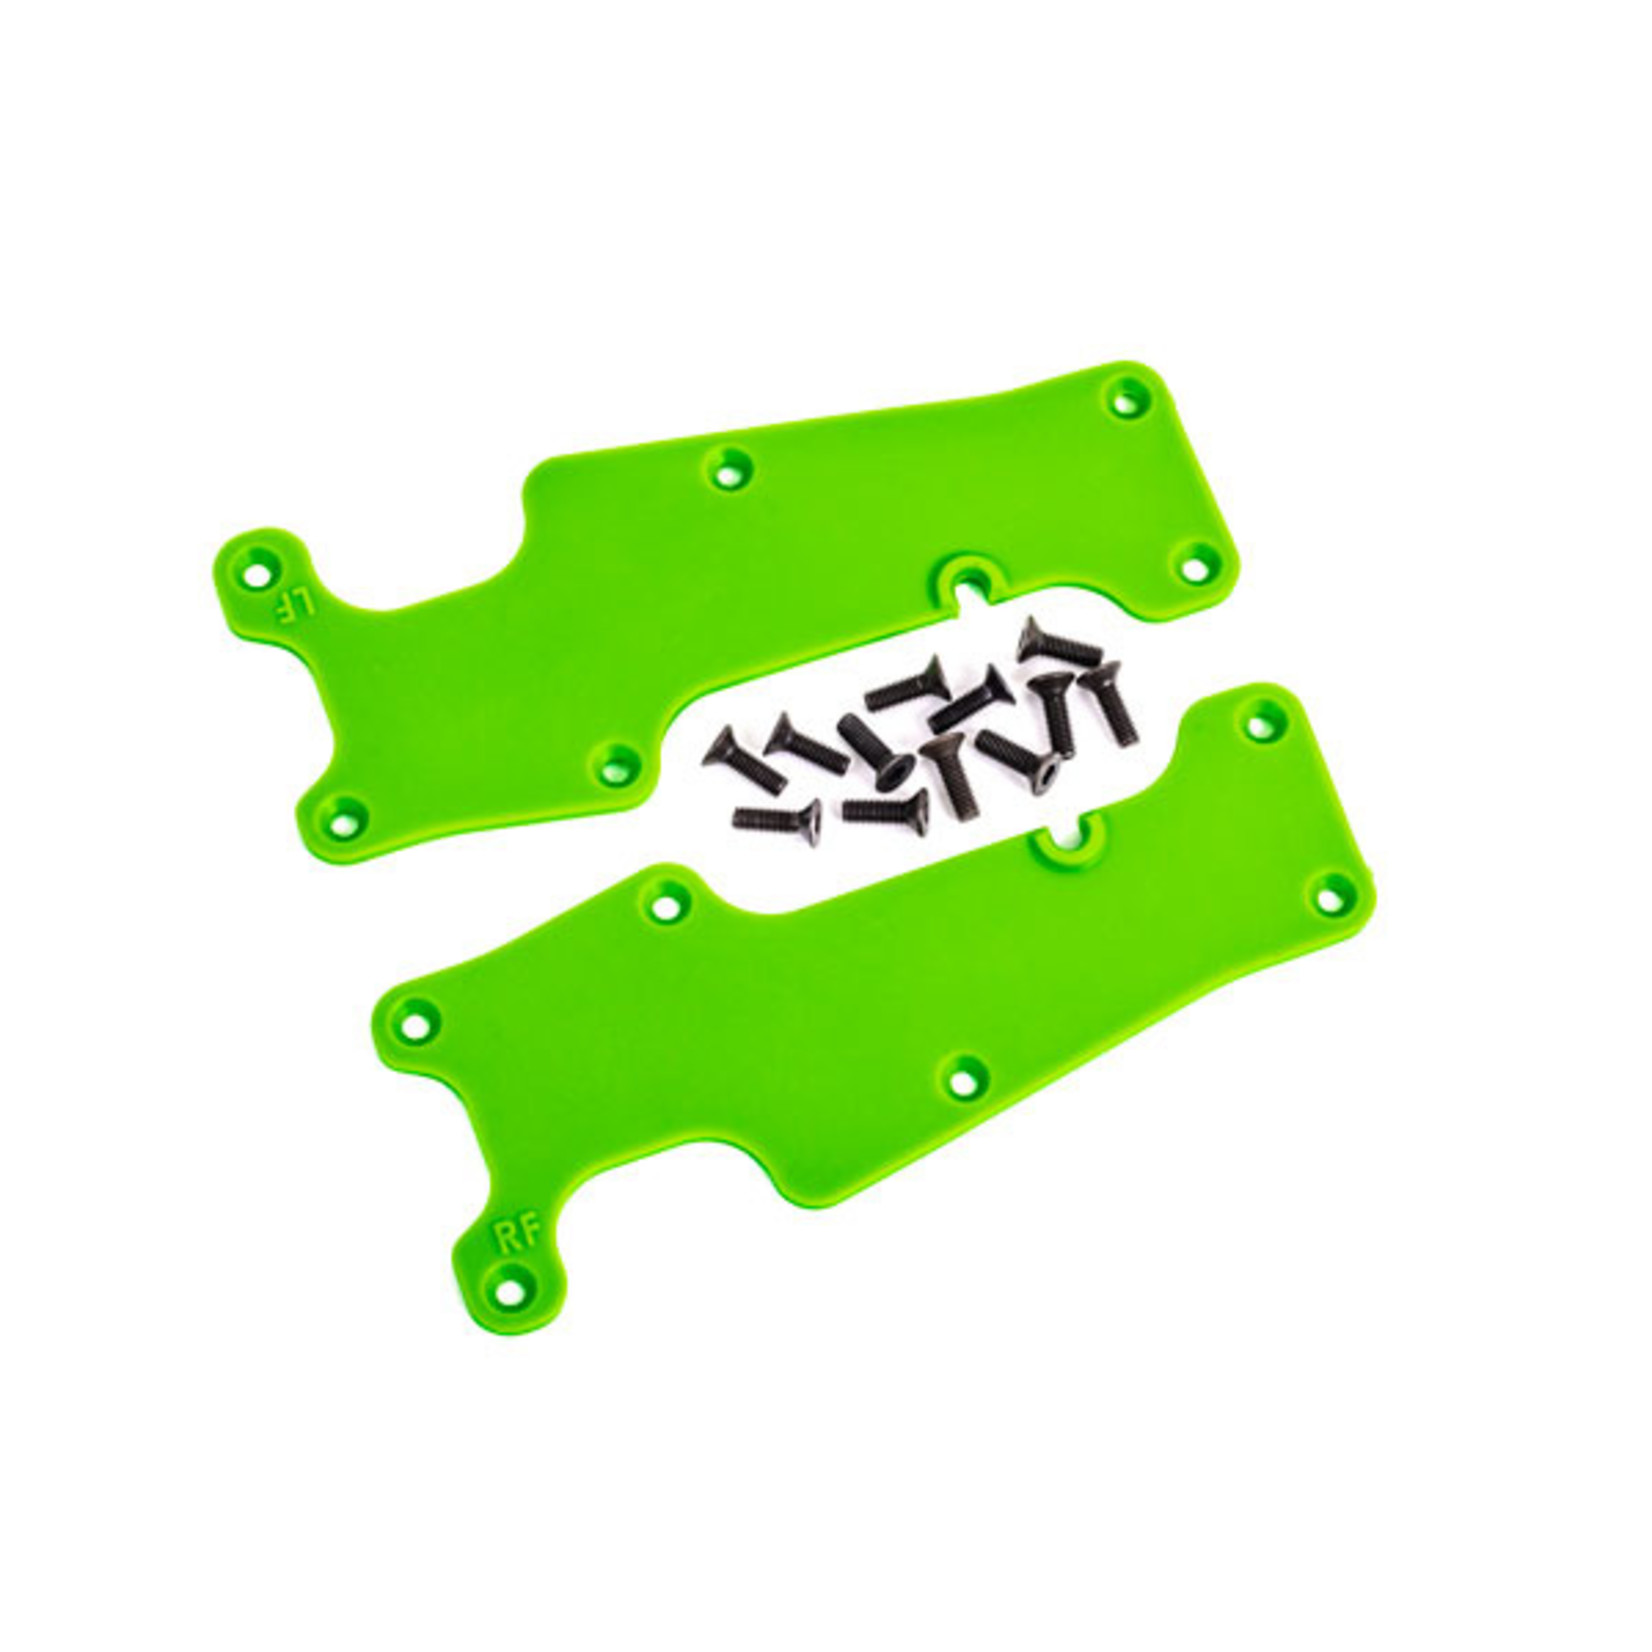 Traxxas 9633G - Suspension arm covers, green, front (left